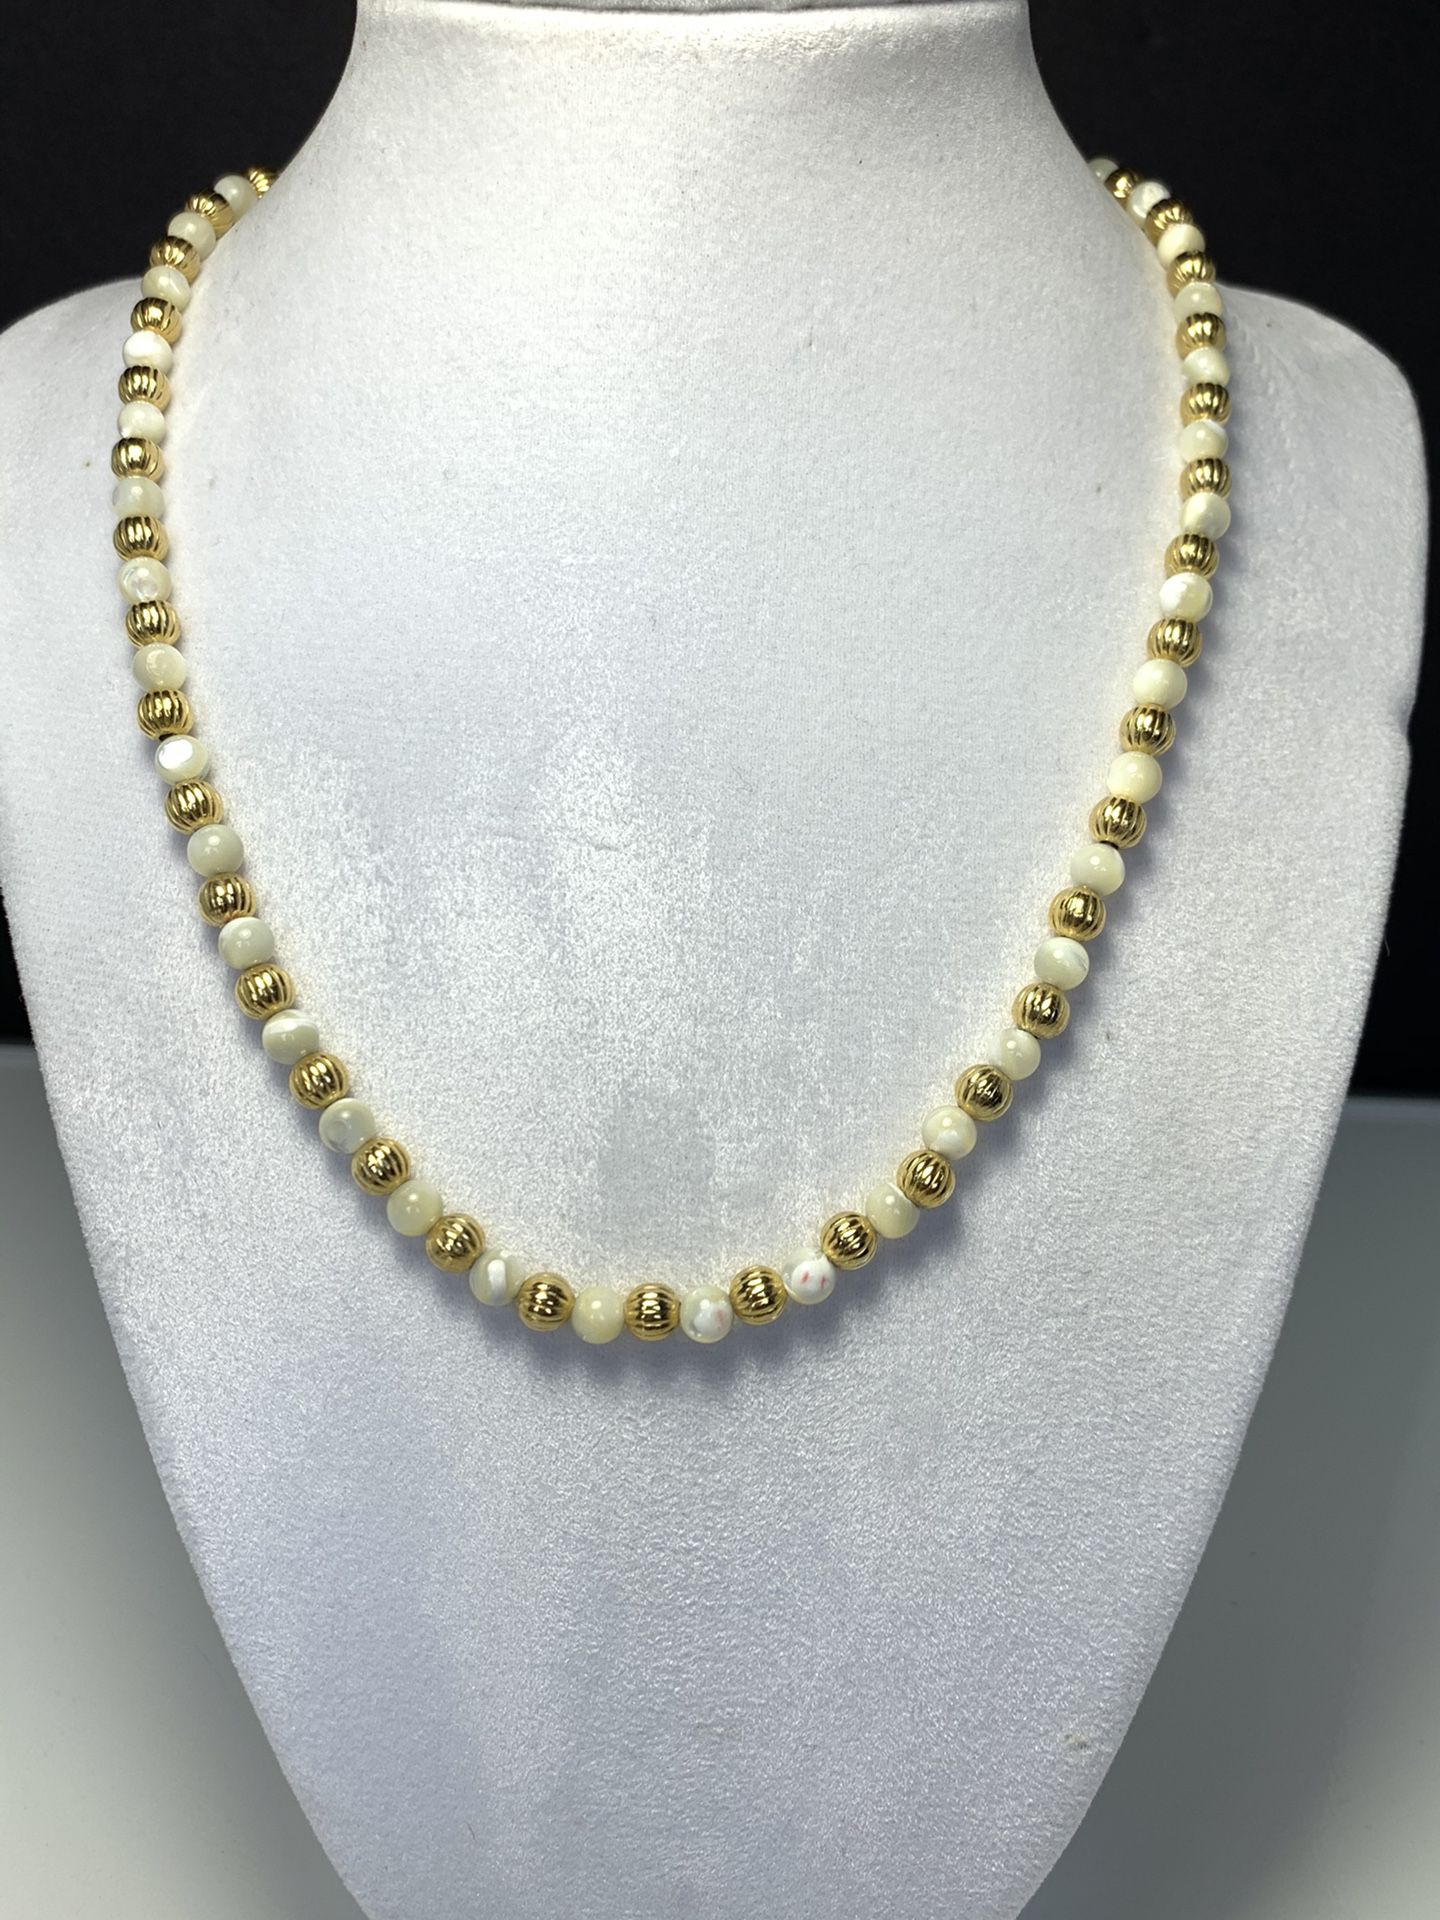 Moonstone natural ball and gold tone necklace 18” inches long